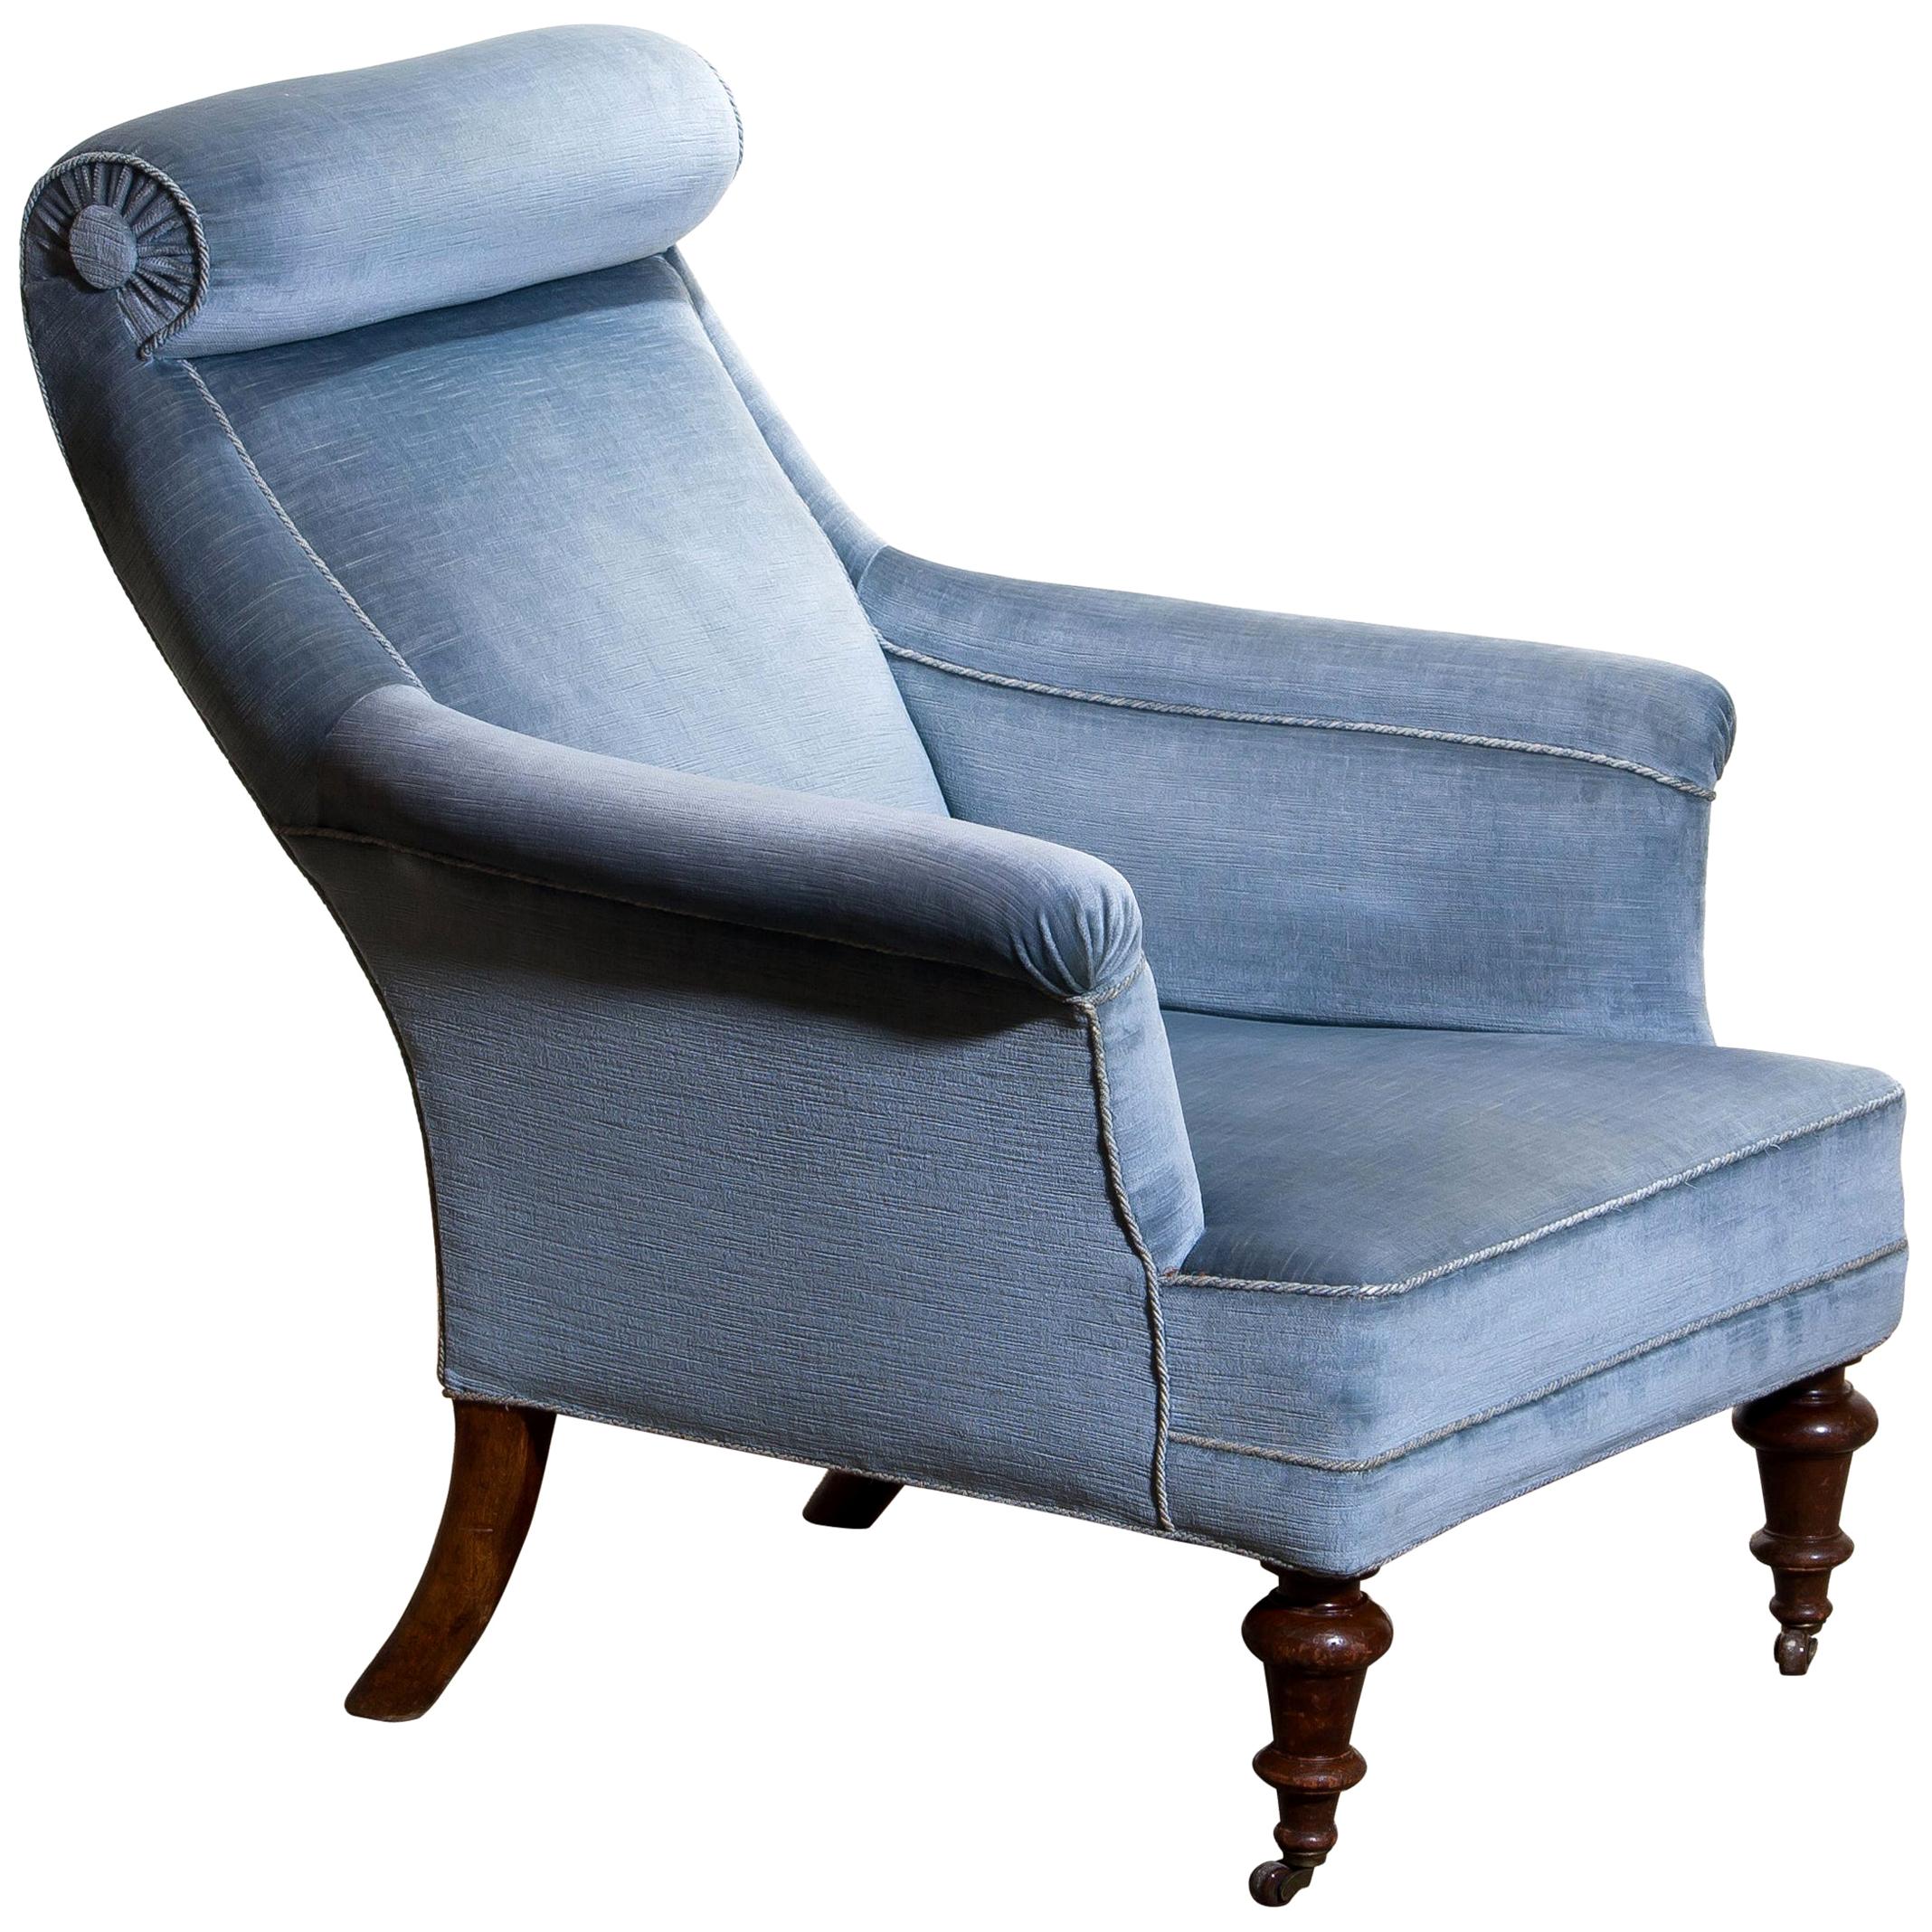 Rare and extremely comfortable / beautiful bergère or lounge chair in Dorothy Draper style from the turn to the 20th century.
Upholstered in ice blue velvet and in good condition.

Period: 1900.